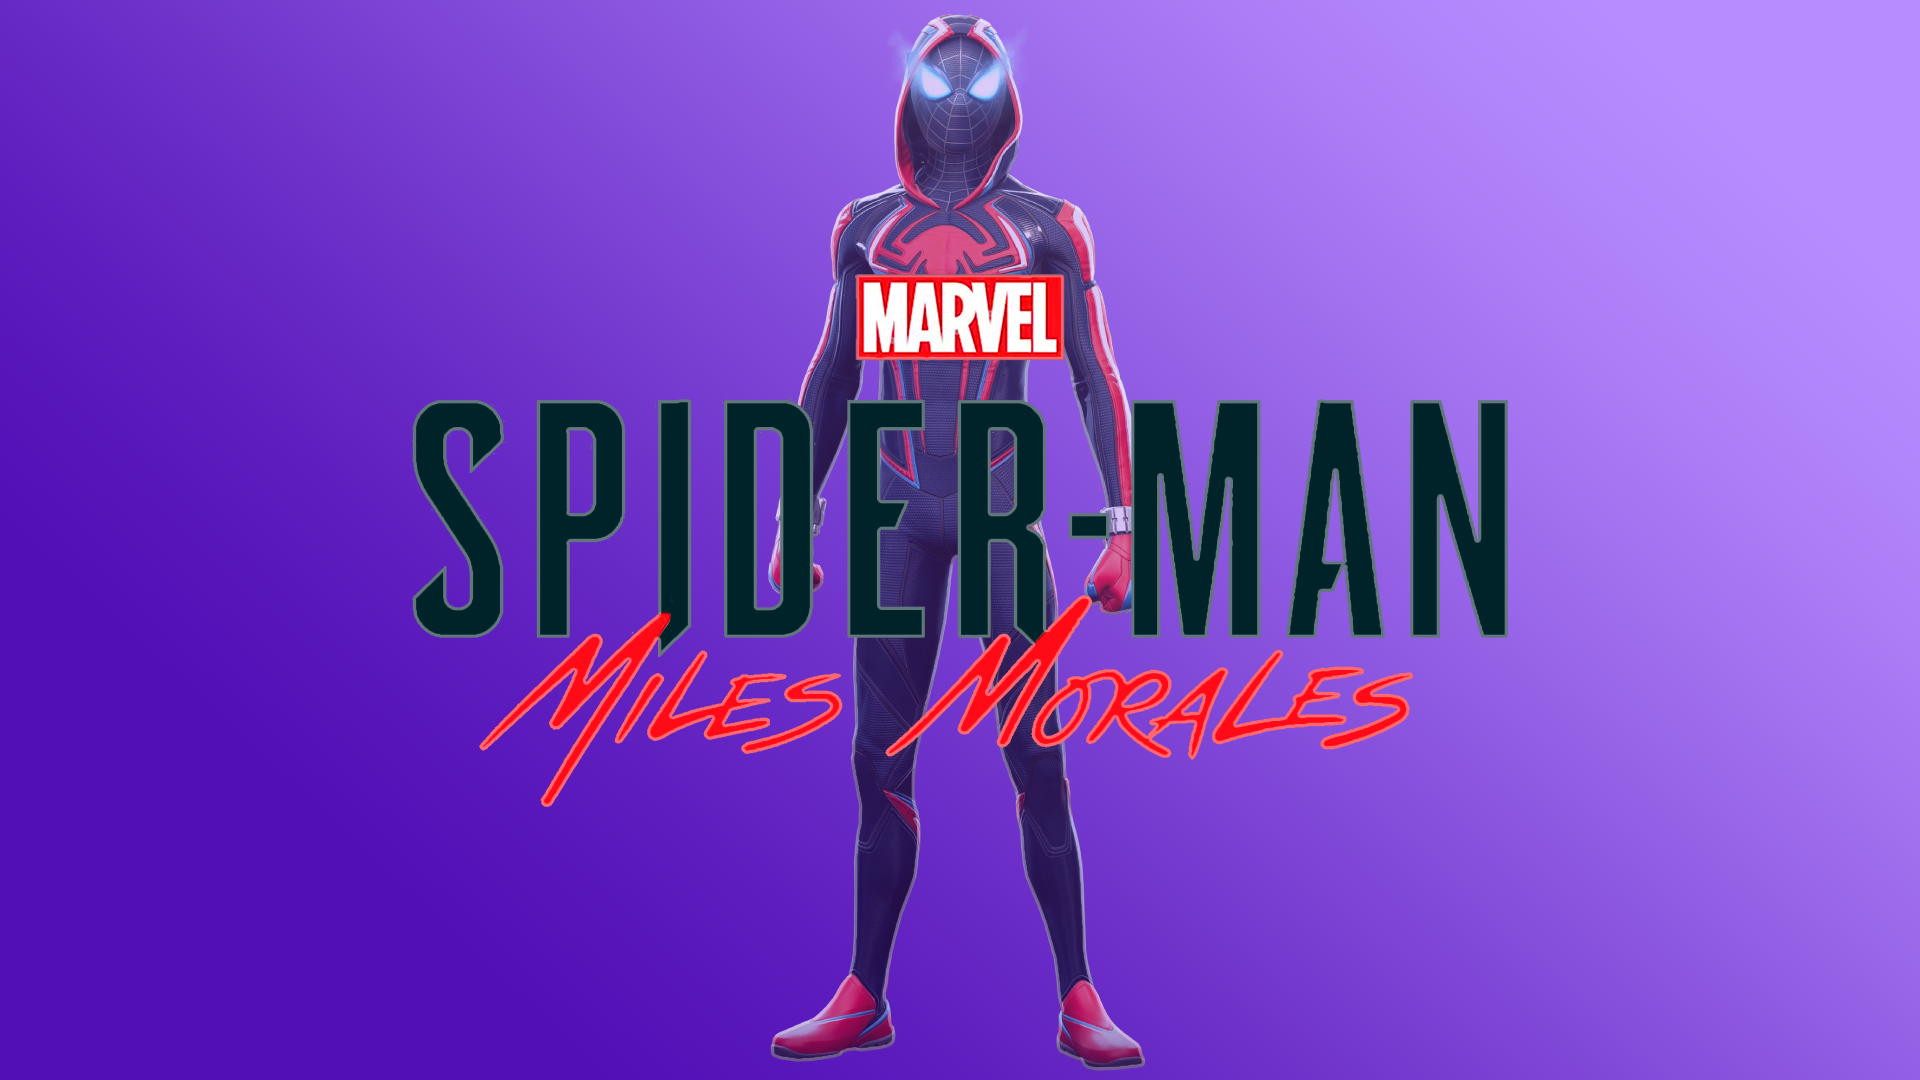 Marvel's Spider-Man Miles Morales PC Edition gets high marks from journalists and gamers